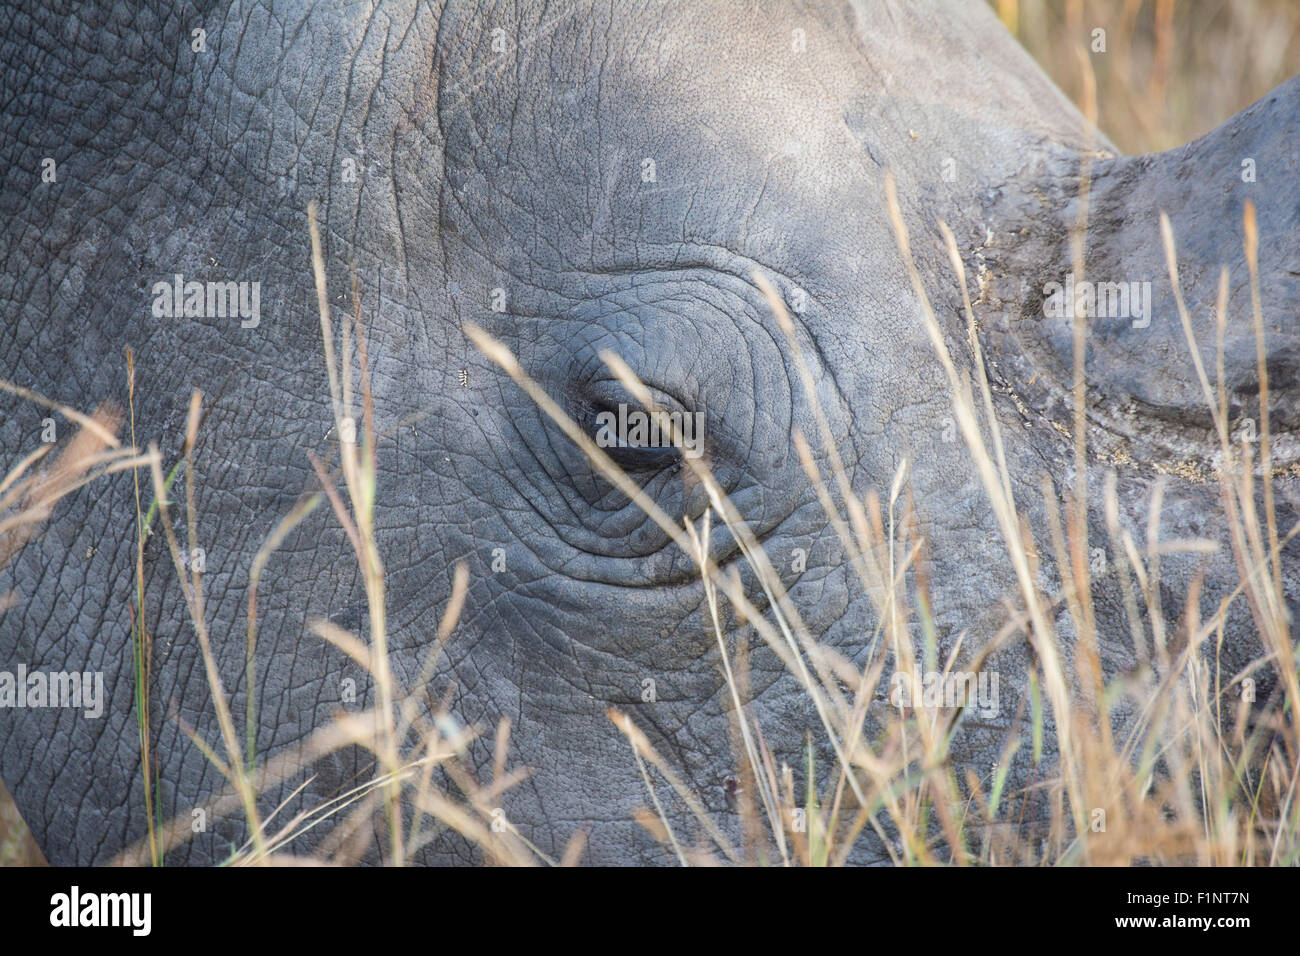 Close up of the head of a rhino Stock Photo